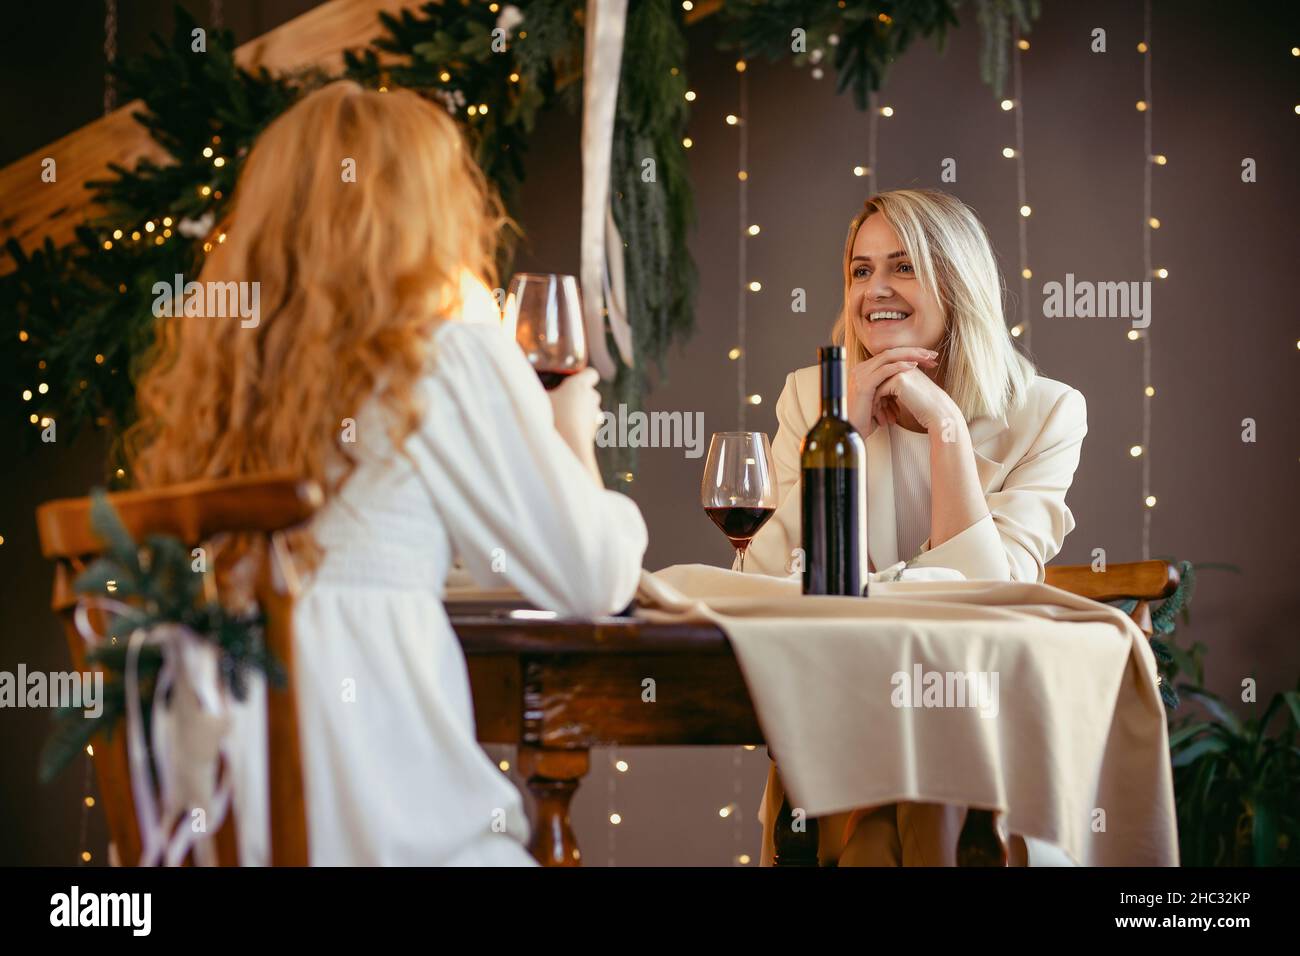 lesbian couple having dinner in a restaurant Girl giving a gift to her sweetheart Stock Photo